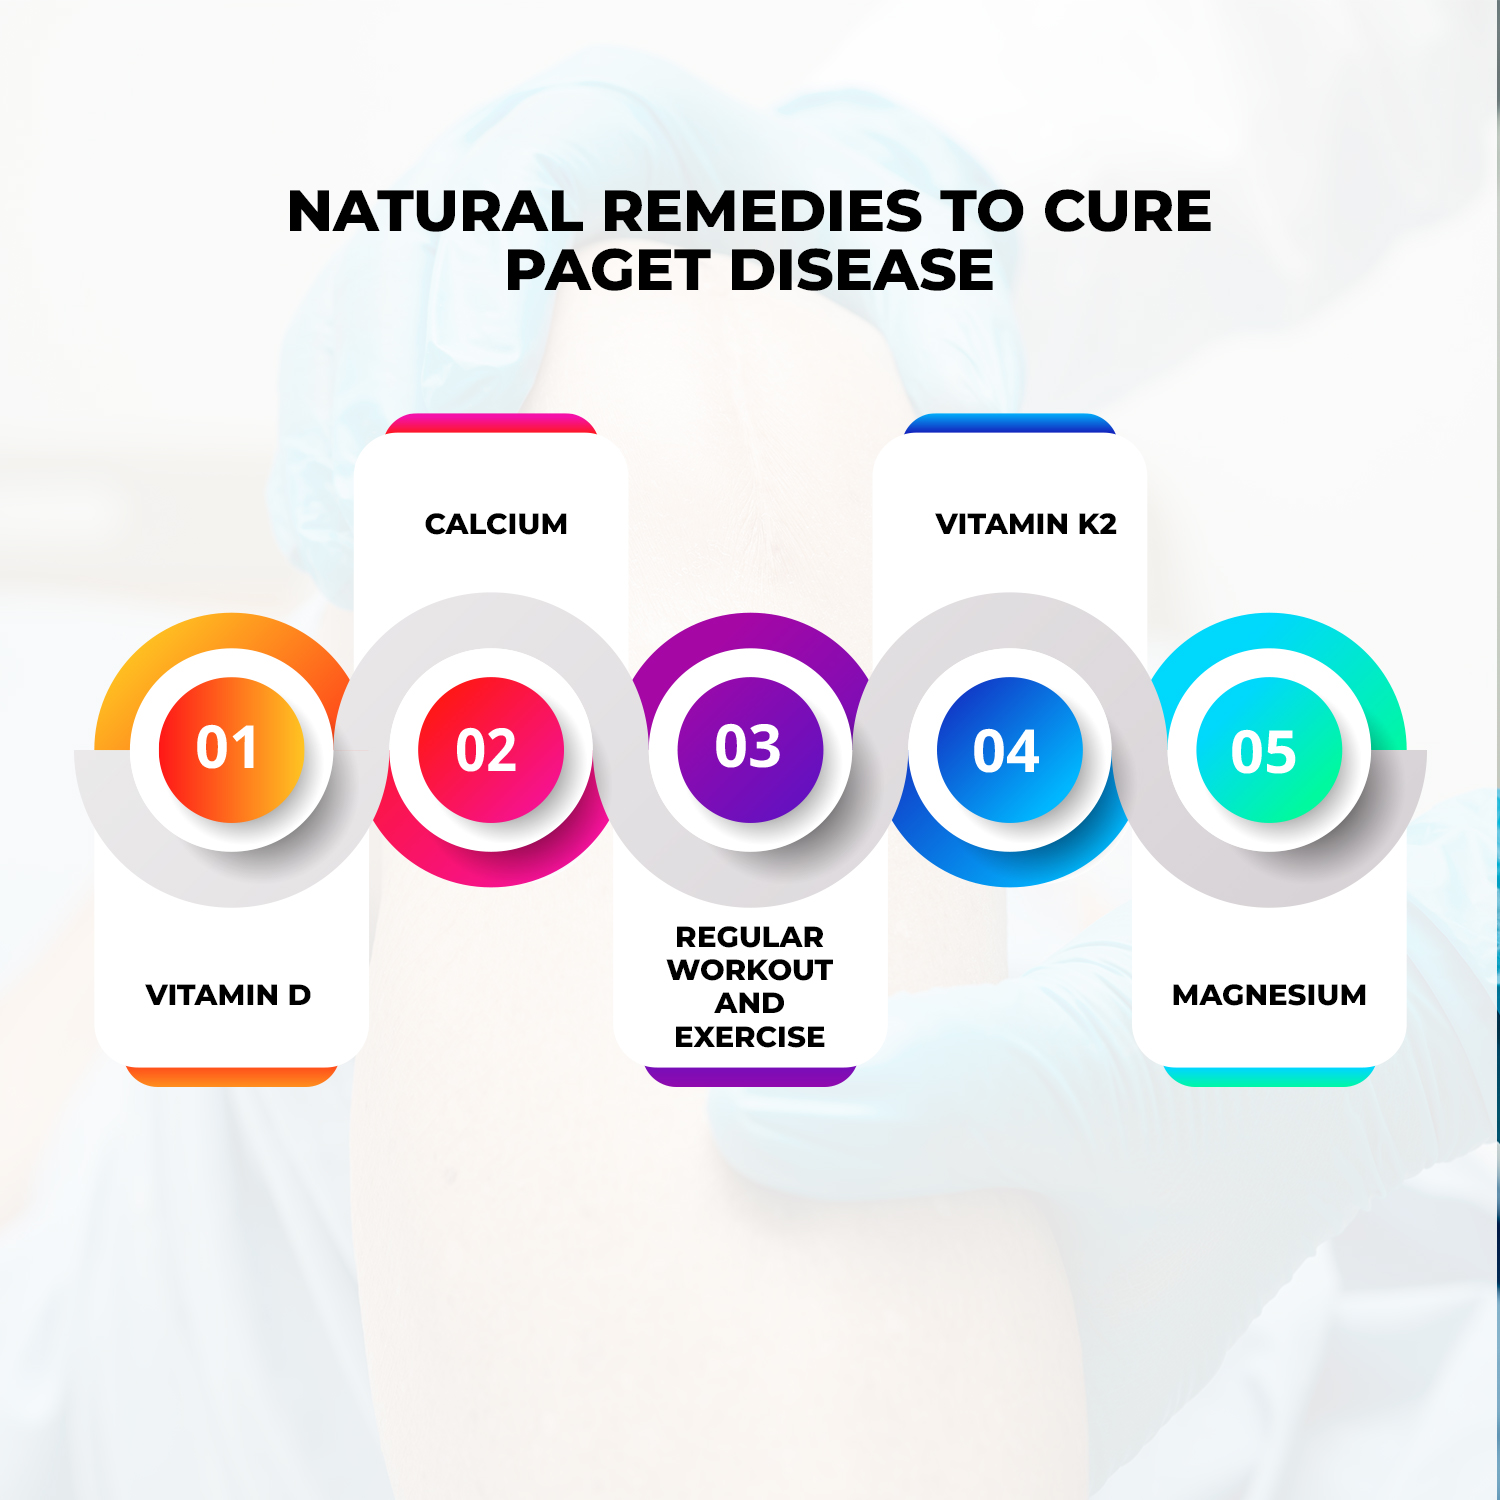 5 Natural Remedies To Cure Paget Disease